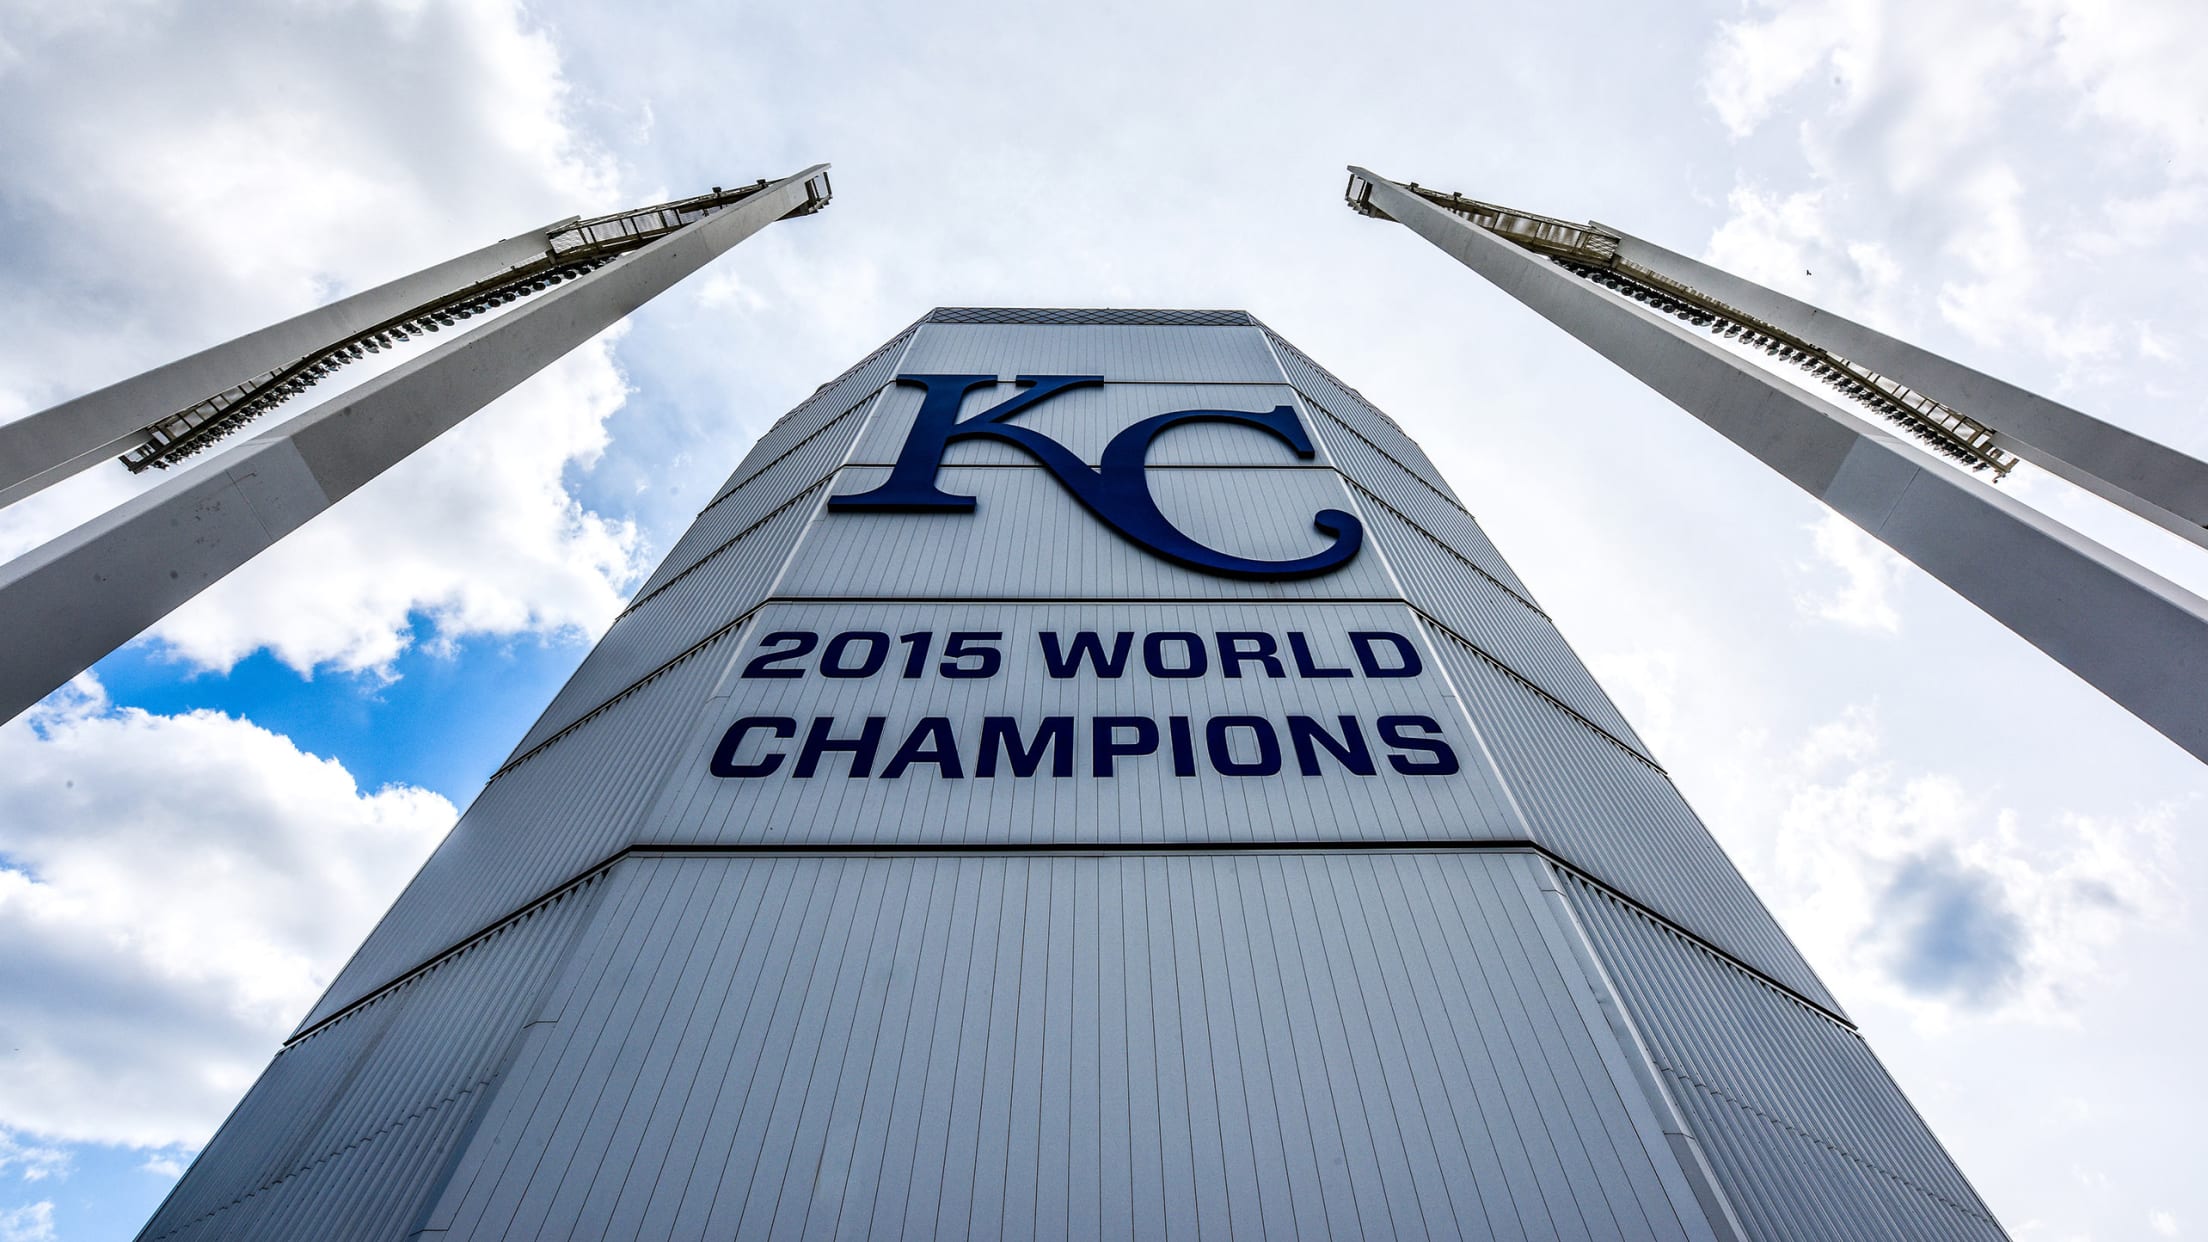 Royals to welcome fans back to Kauffman Stadium for 2021 season  News,  Sports, Jobs - Lawrence Journal-World: news, information, headlines and  events in Lawrence, Kansas